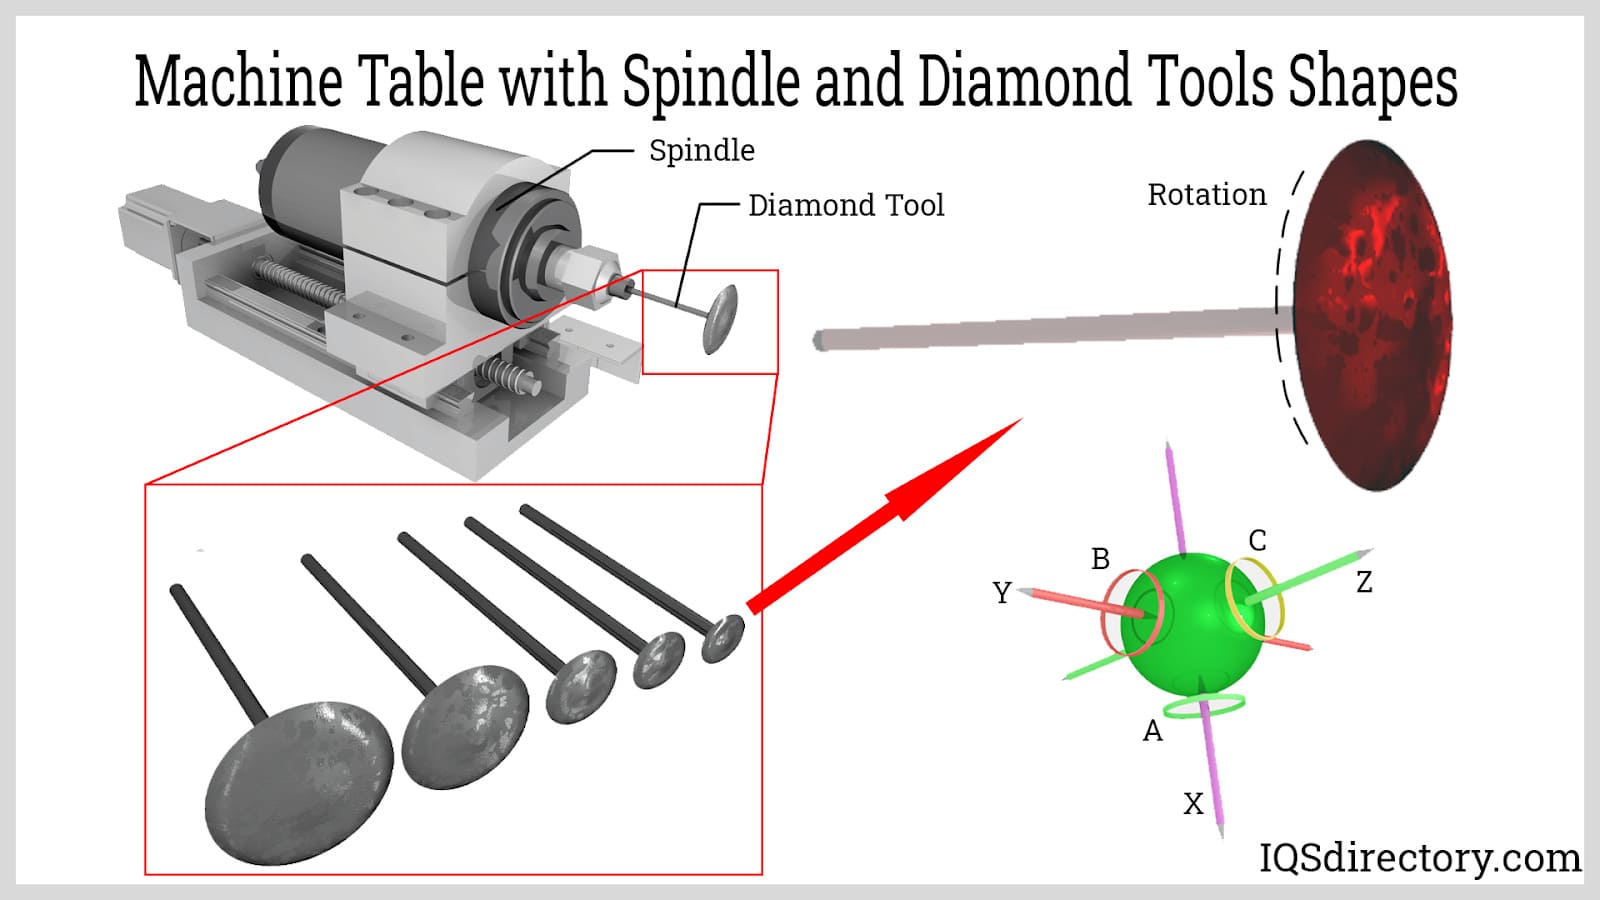 Machine Table with Spindle and Diamond Tools Shapes